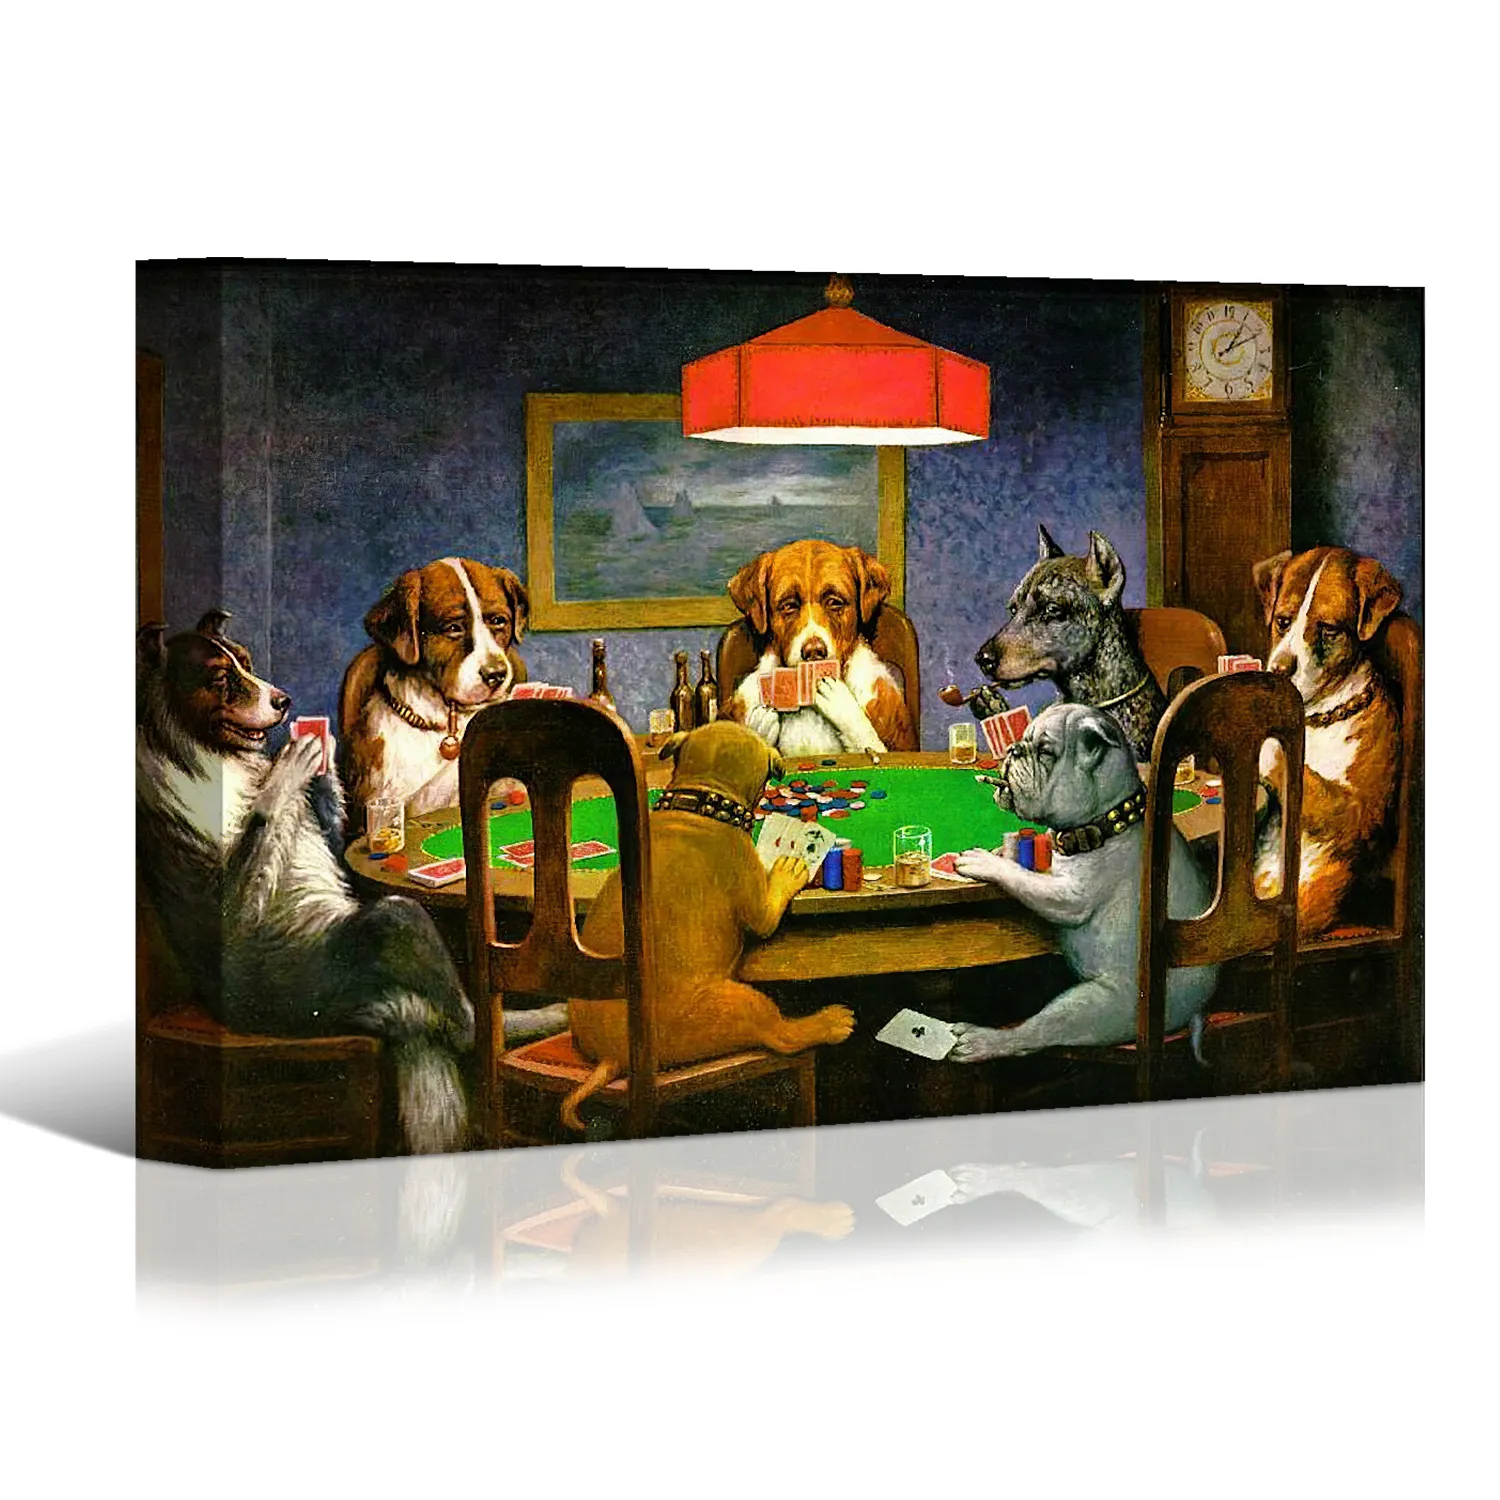 Dogs Playing Poker Cards Canvas Prints Wall Art,Funny Famous Painting Giclee Artwork Reprodu No Frame Home Decoration